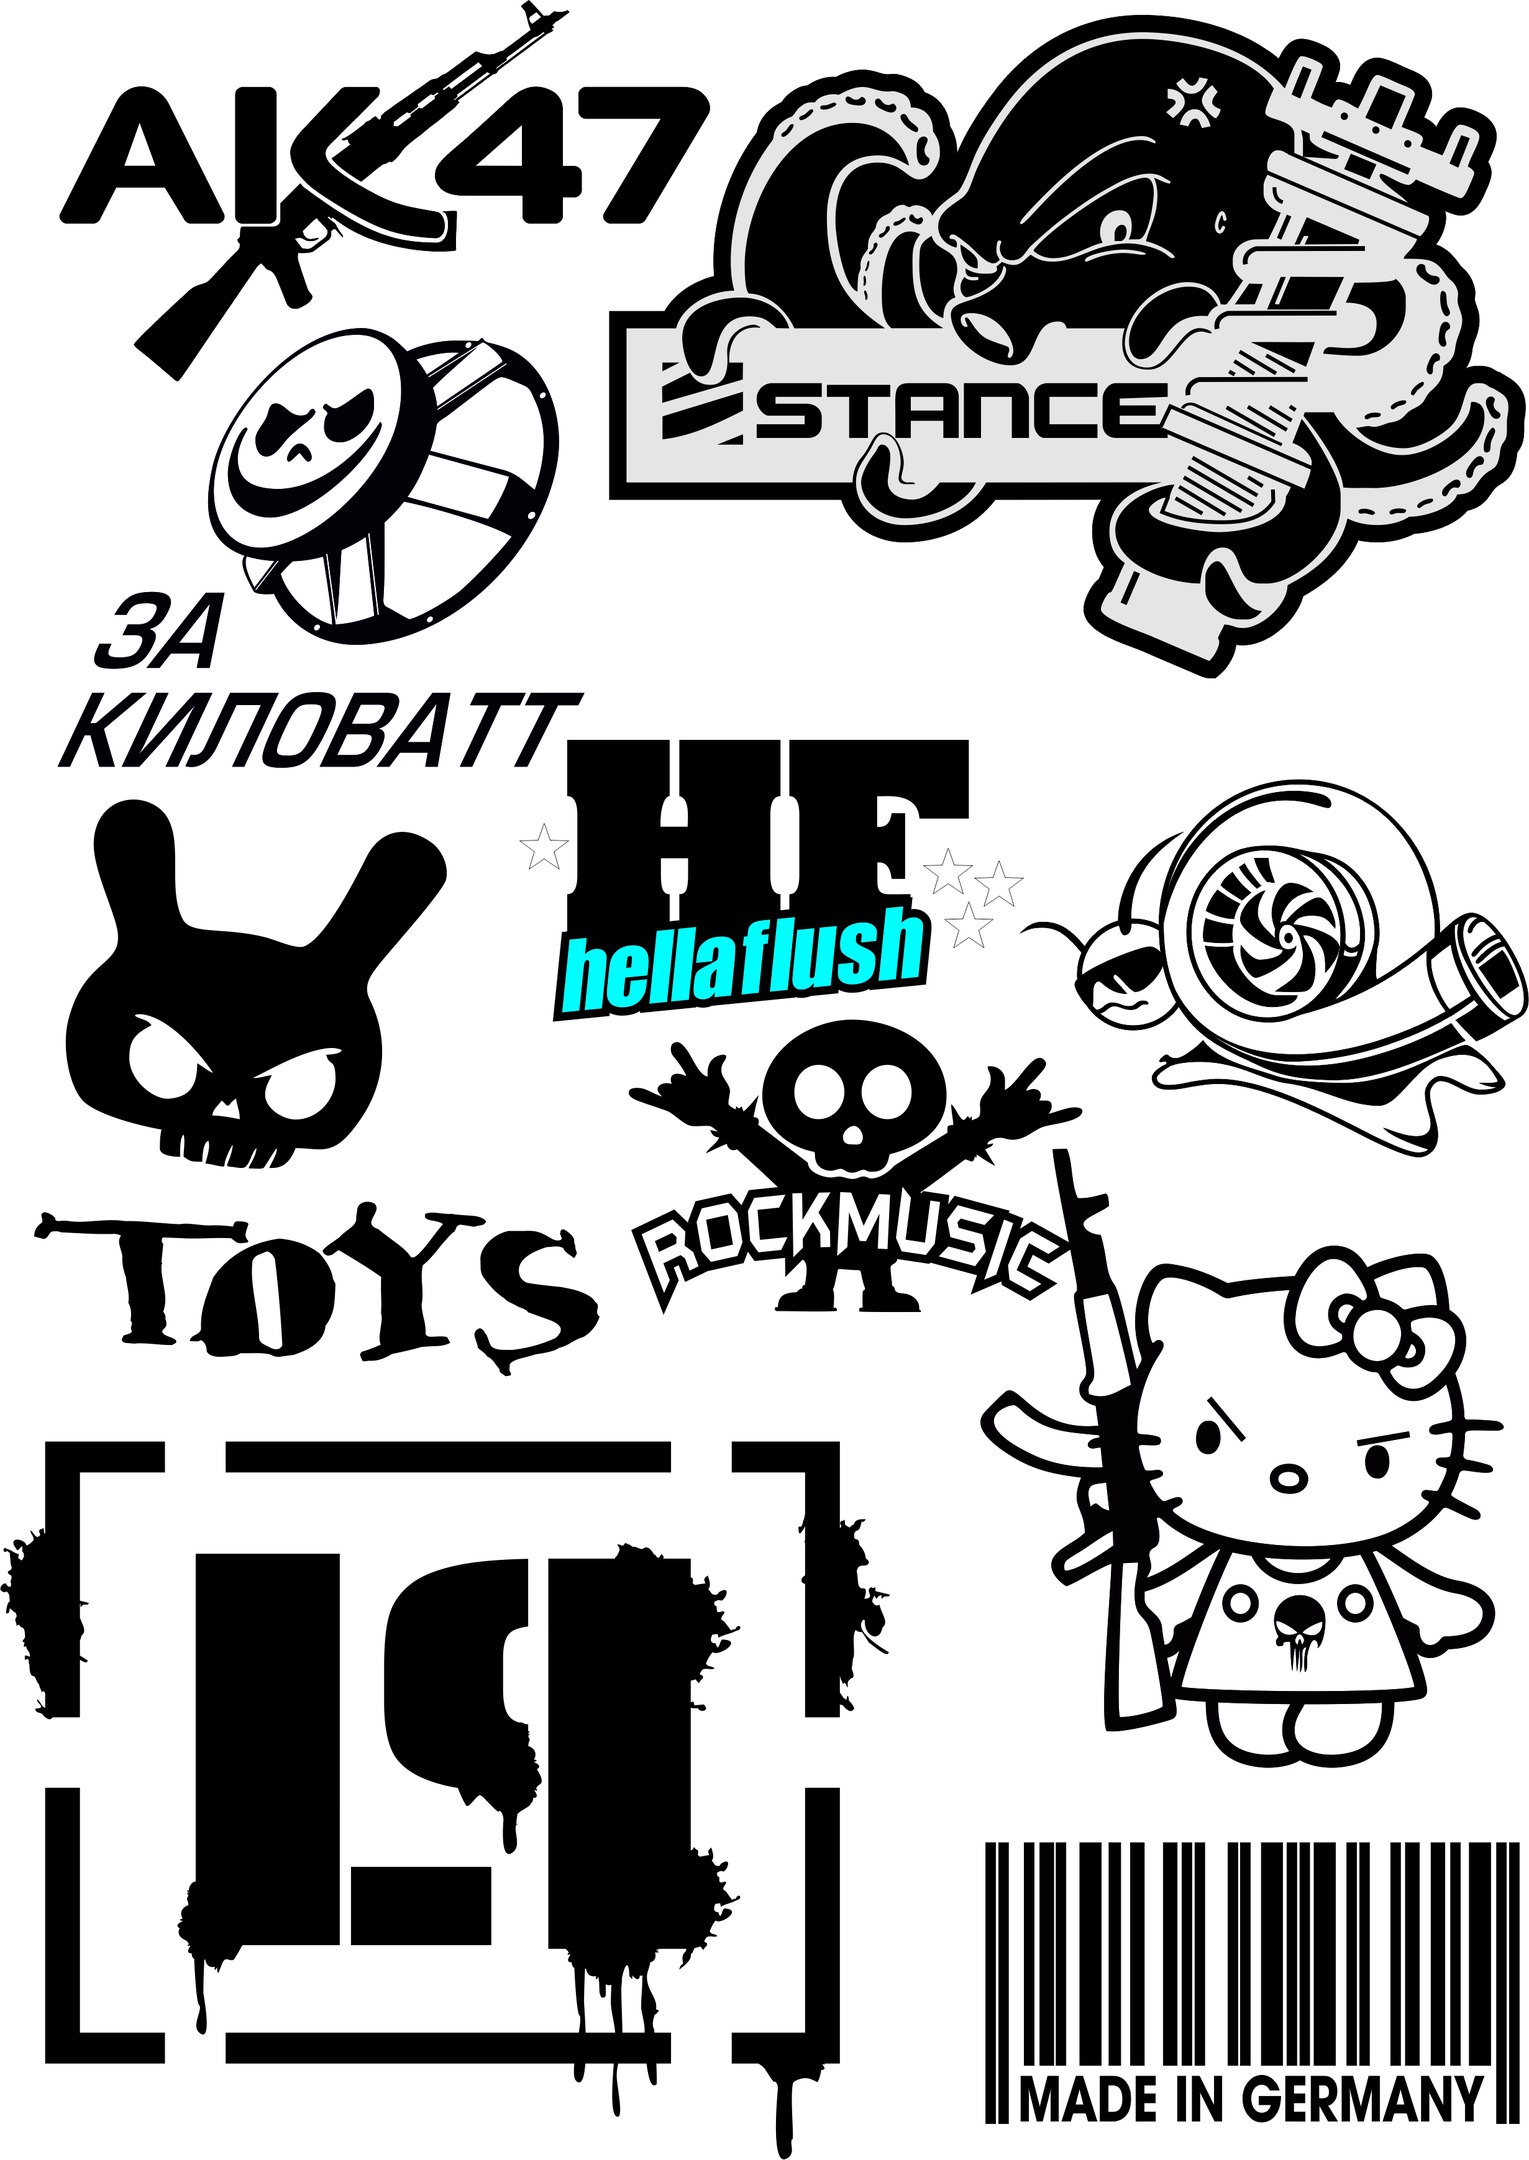 Download Vector car stickers Free Vector cdr Download - 3axis.co